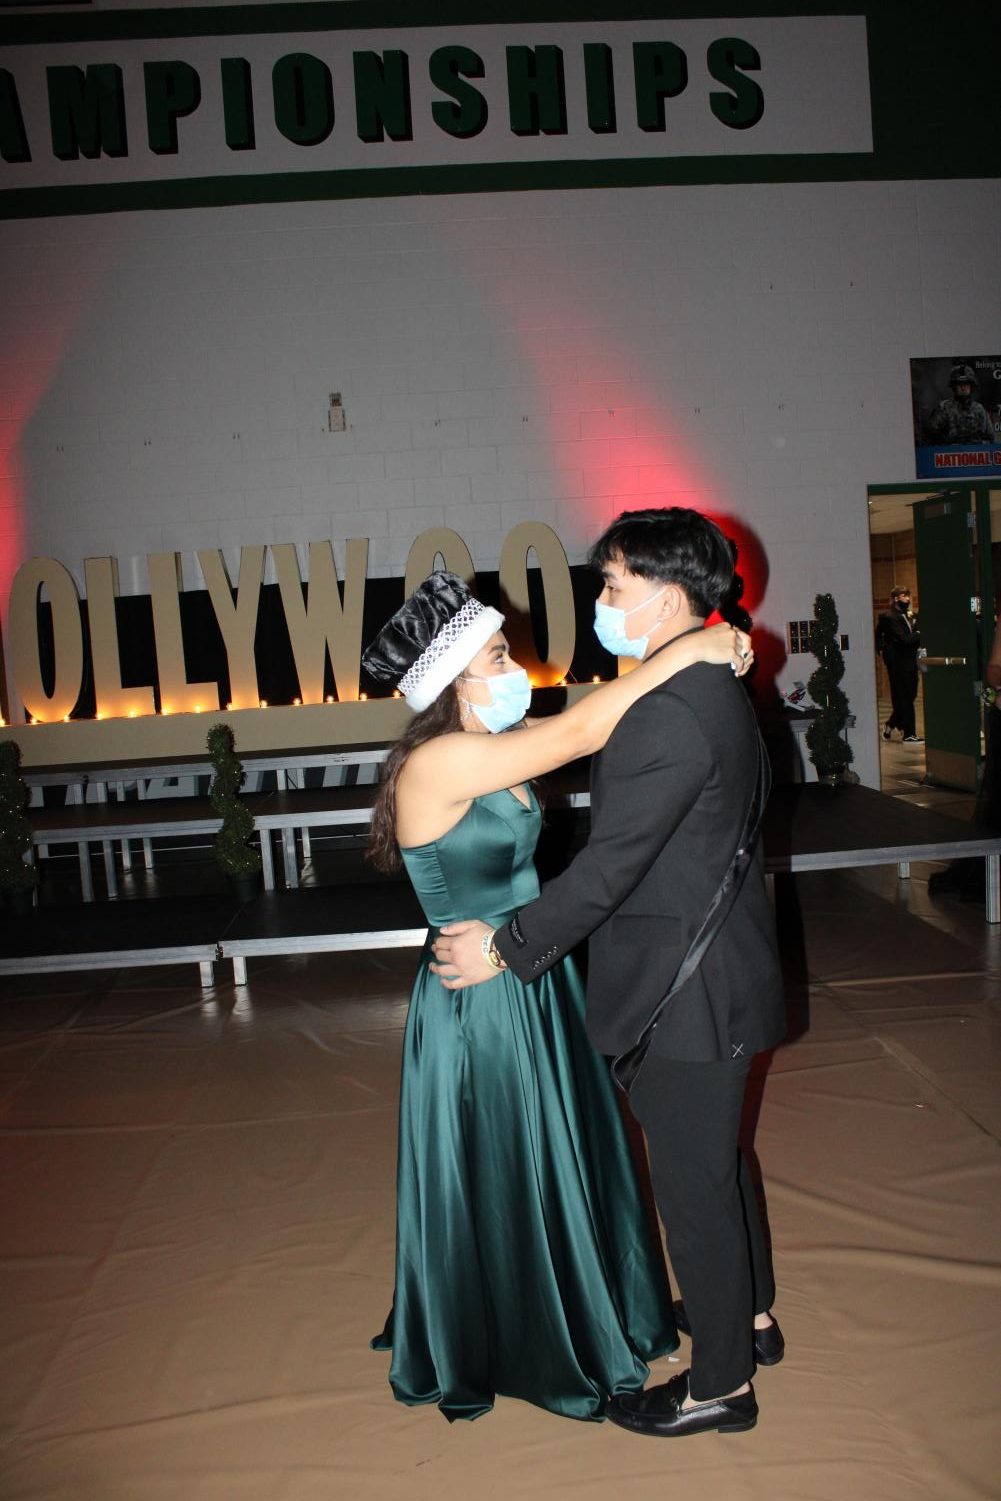 Prom+2021+%28Photos+by+Joselyn+Steele%29